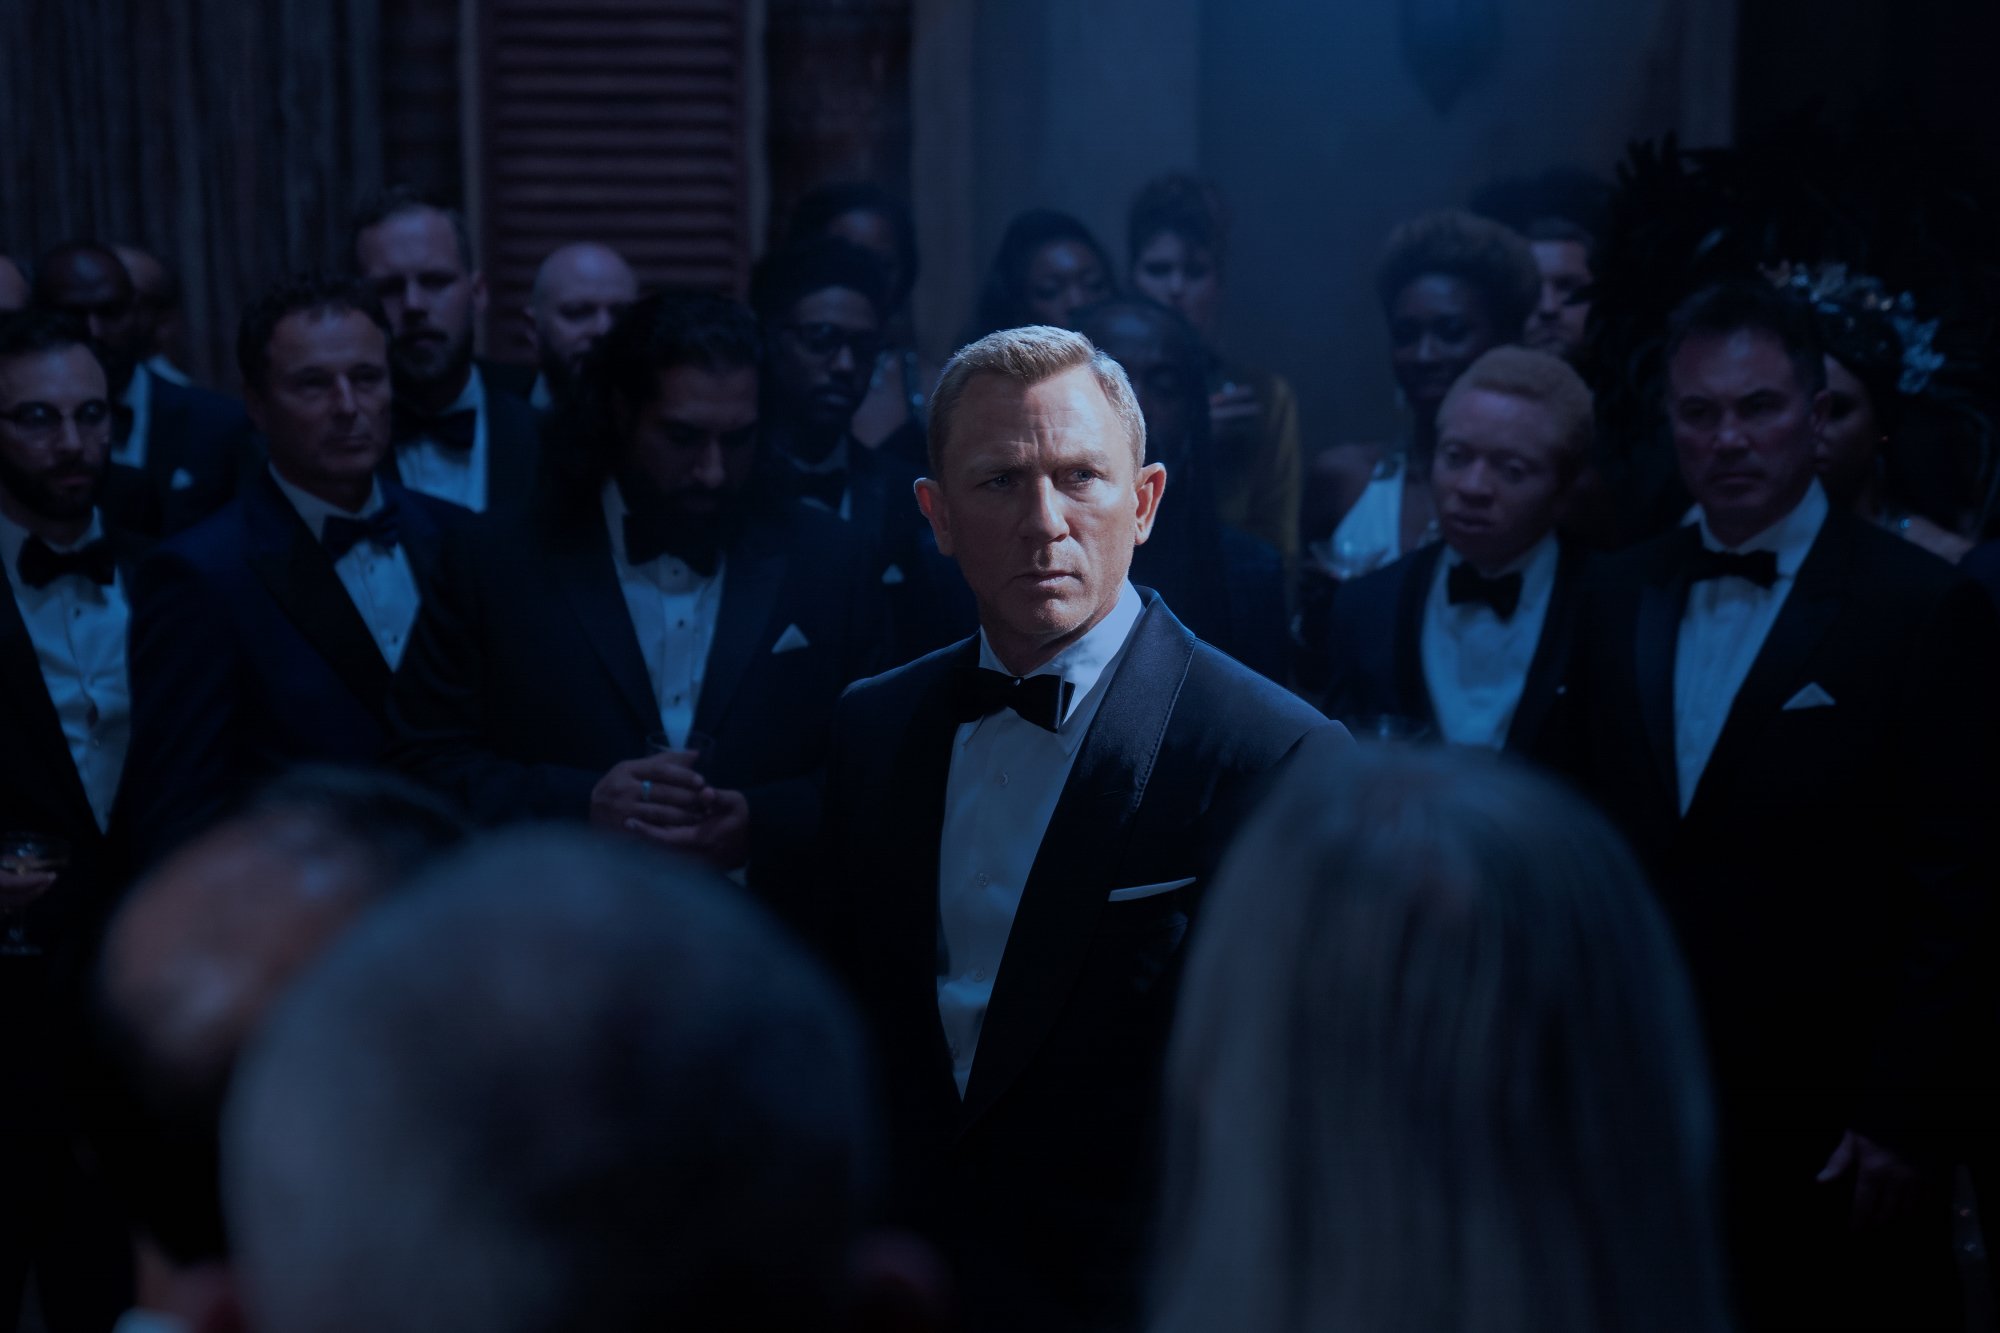 'No Time to Die' Daniel Craig James Bond wearing a suit standing in the middle of a crowd with a spotlight on him